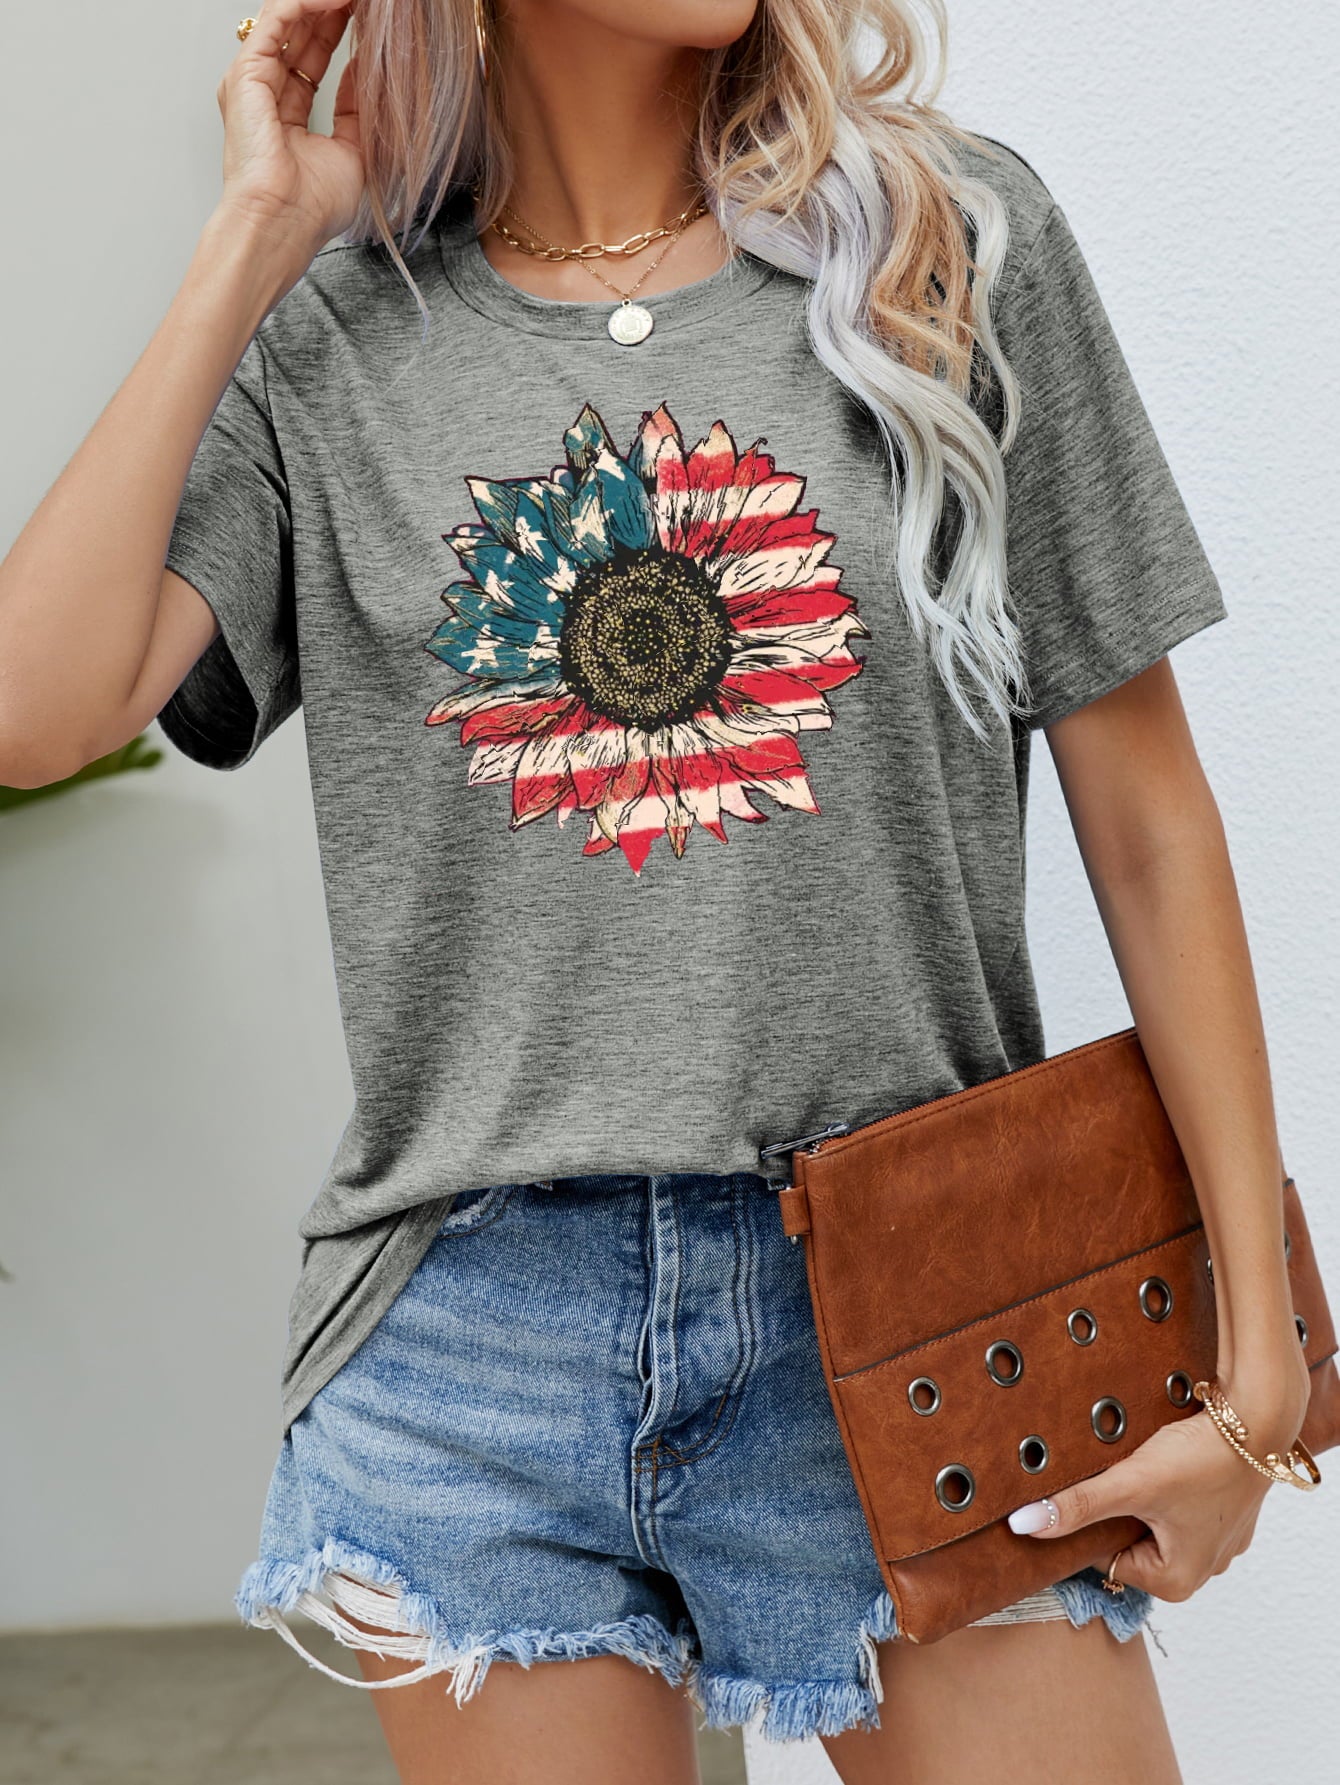 US Flag Flower Graphic Tee (5 Colors)  Krazy Heart Designs Boutique Mid Gray S 